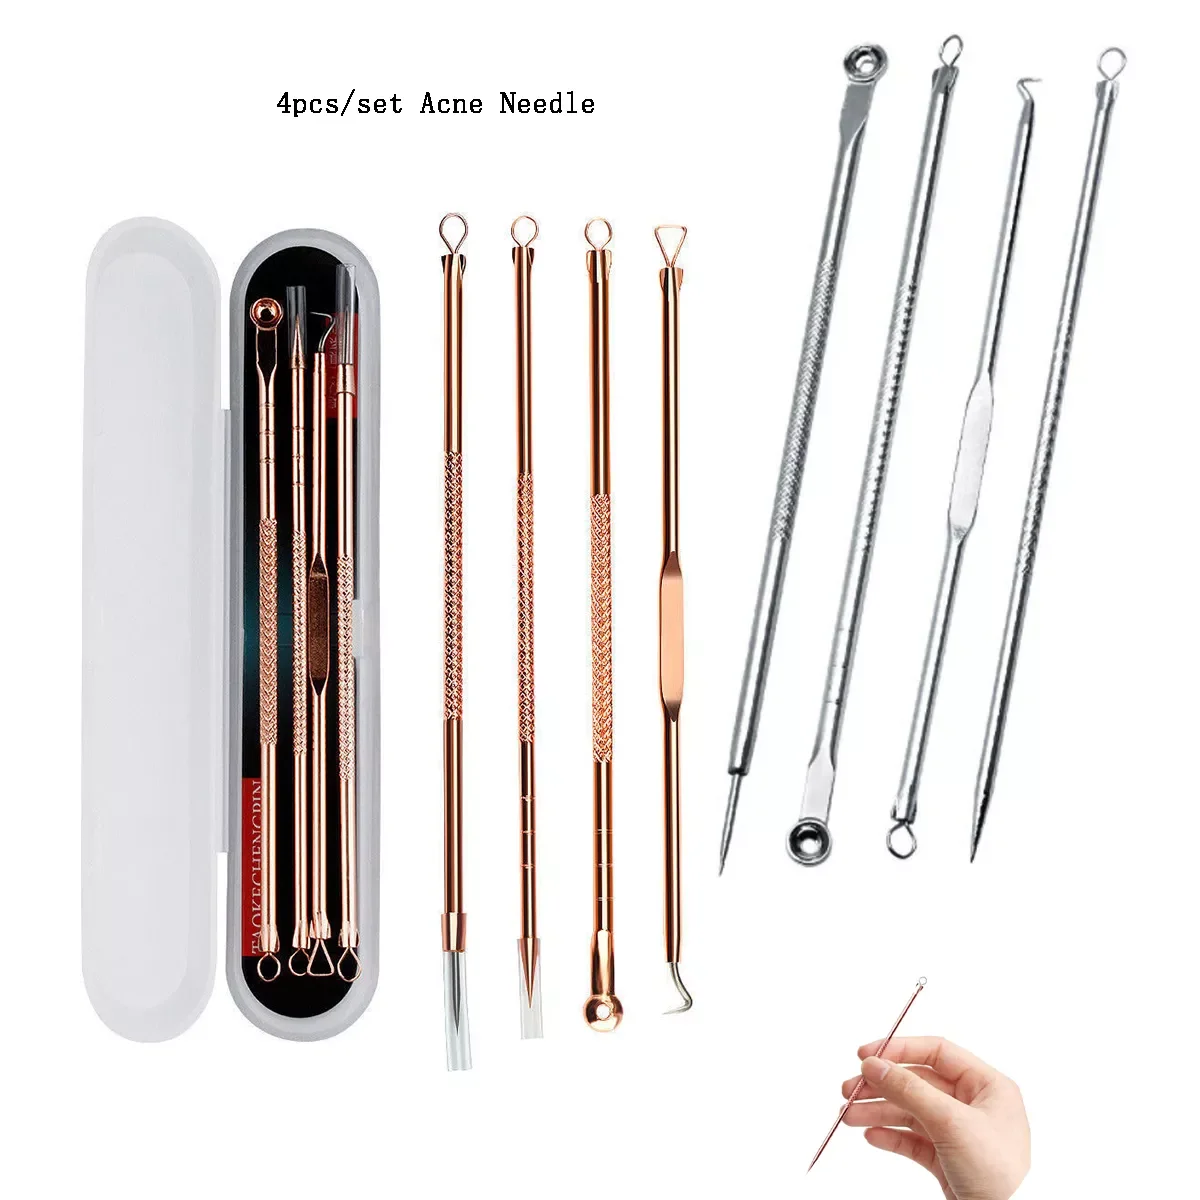 New in Pcs Stainless Steel Blackhead Remover Tool Kit Face Massage Whitehead Pimple Spot Comedone Acne Extractor Face Massager f